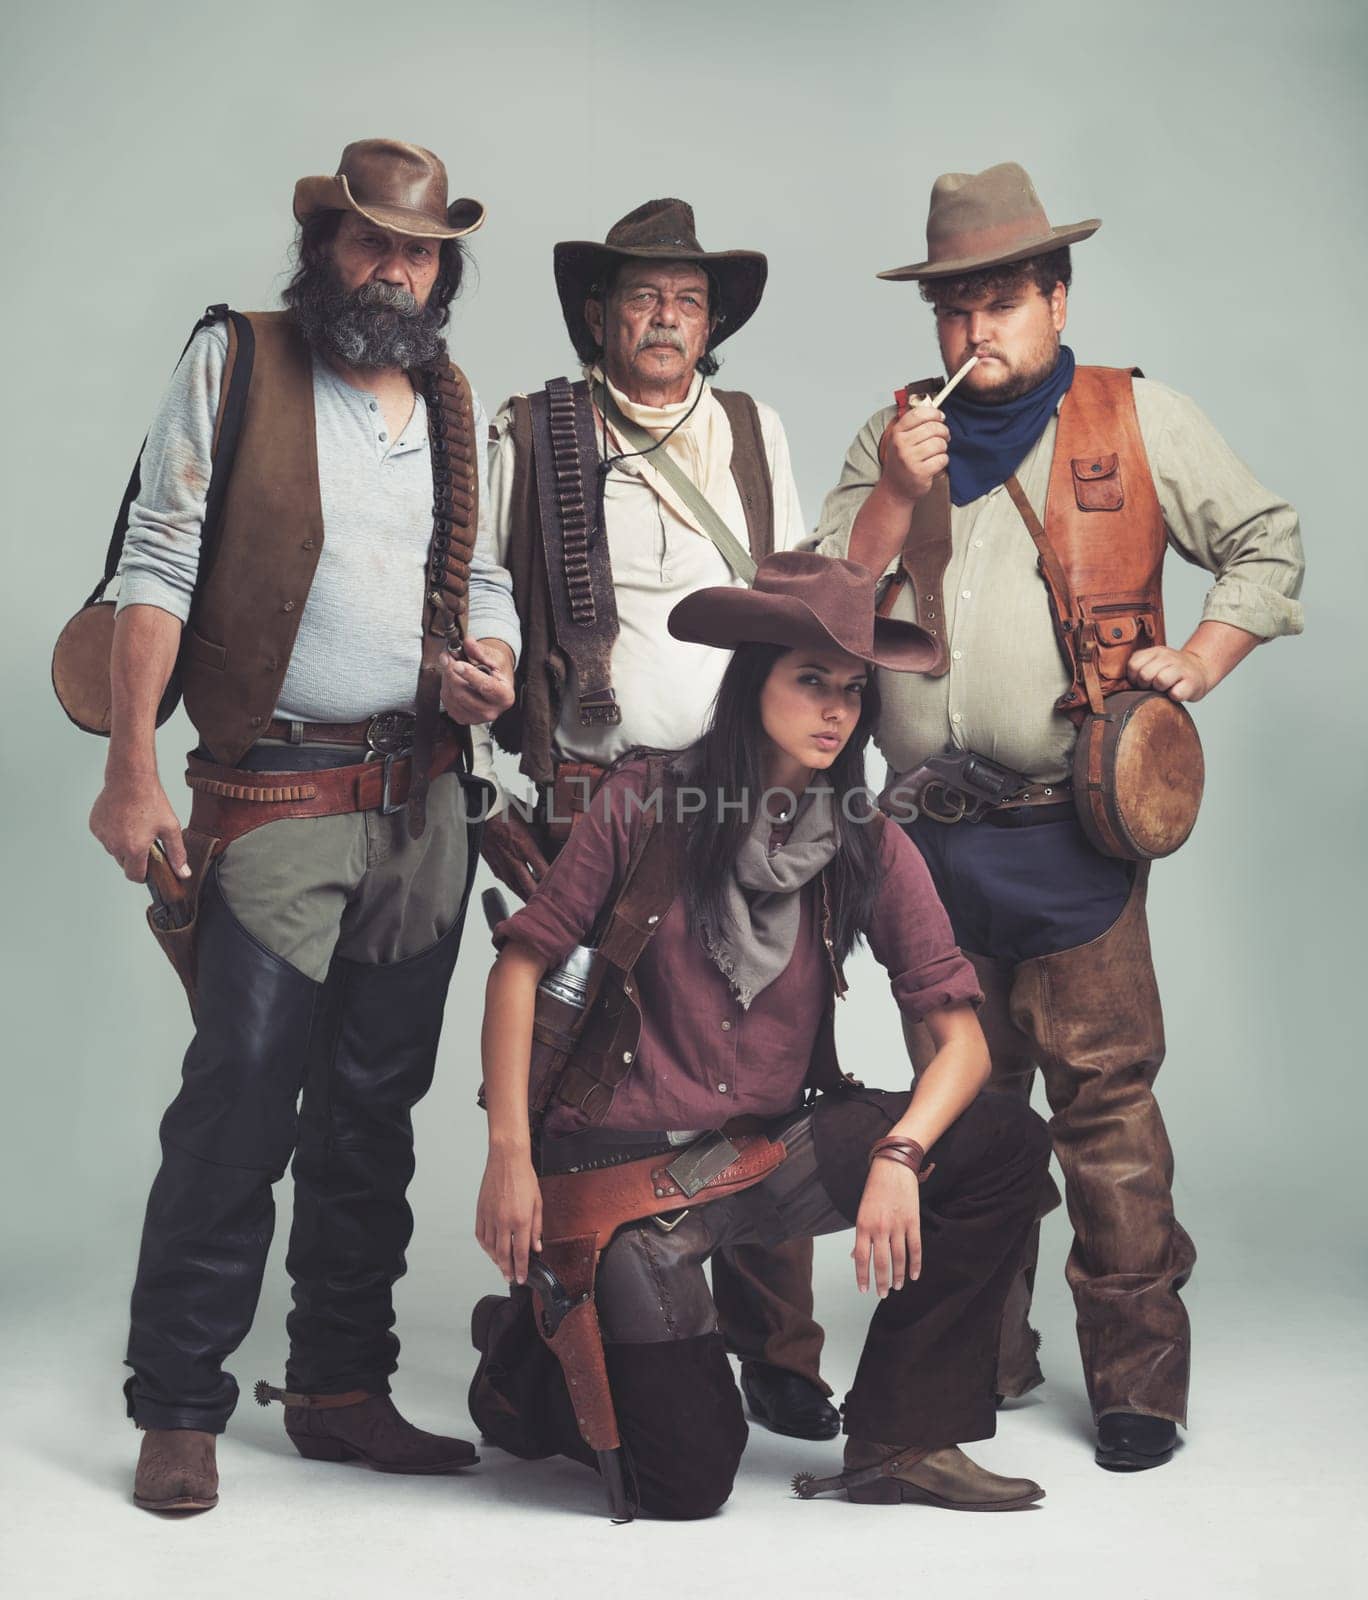 Vintage, western and portrait of cowboy in studio with fashion for halloween, costume and character. Man, woman and group of people with confidence for criminal, band and outlaw lifestyle together by YuriArcurs